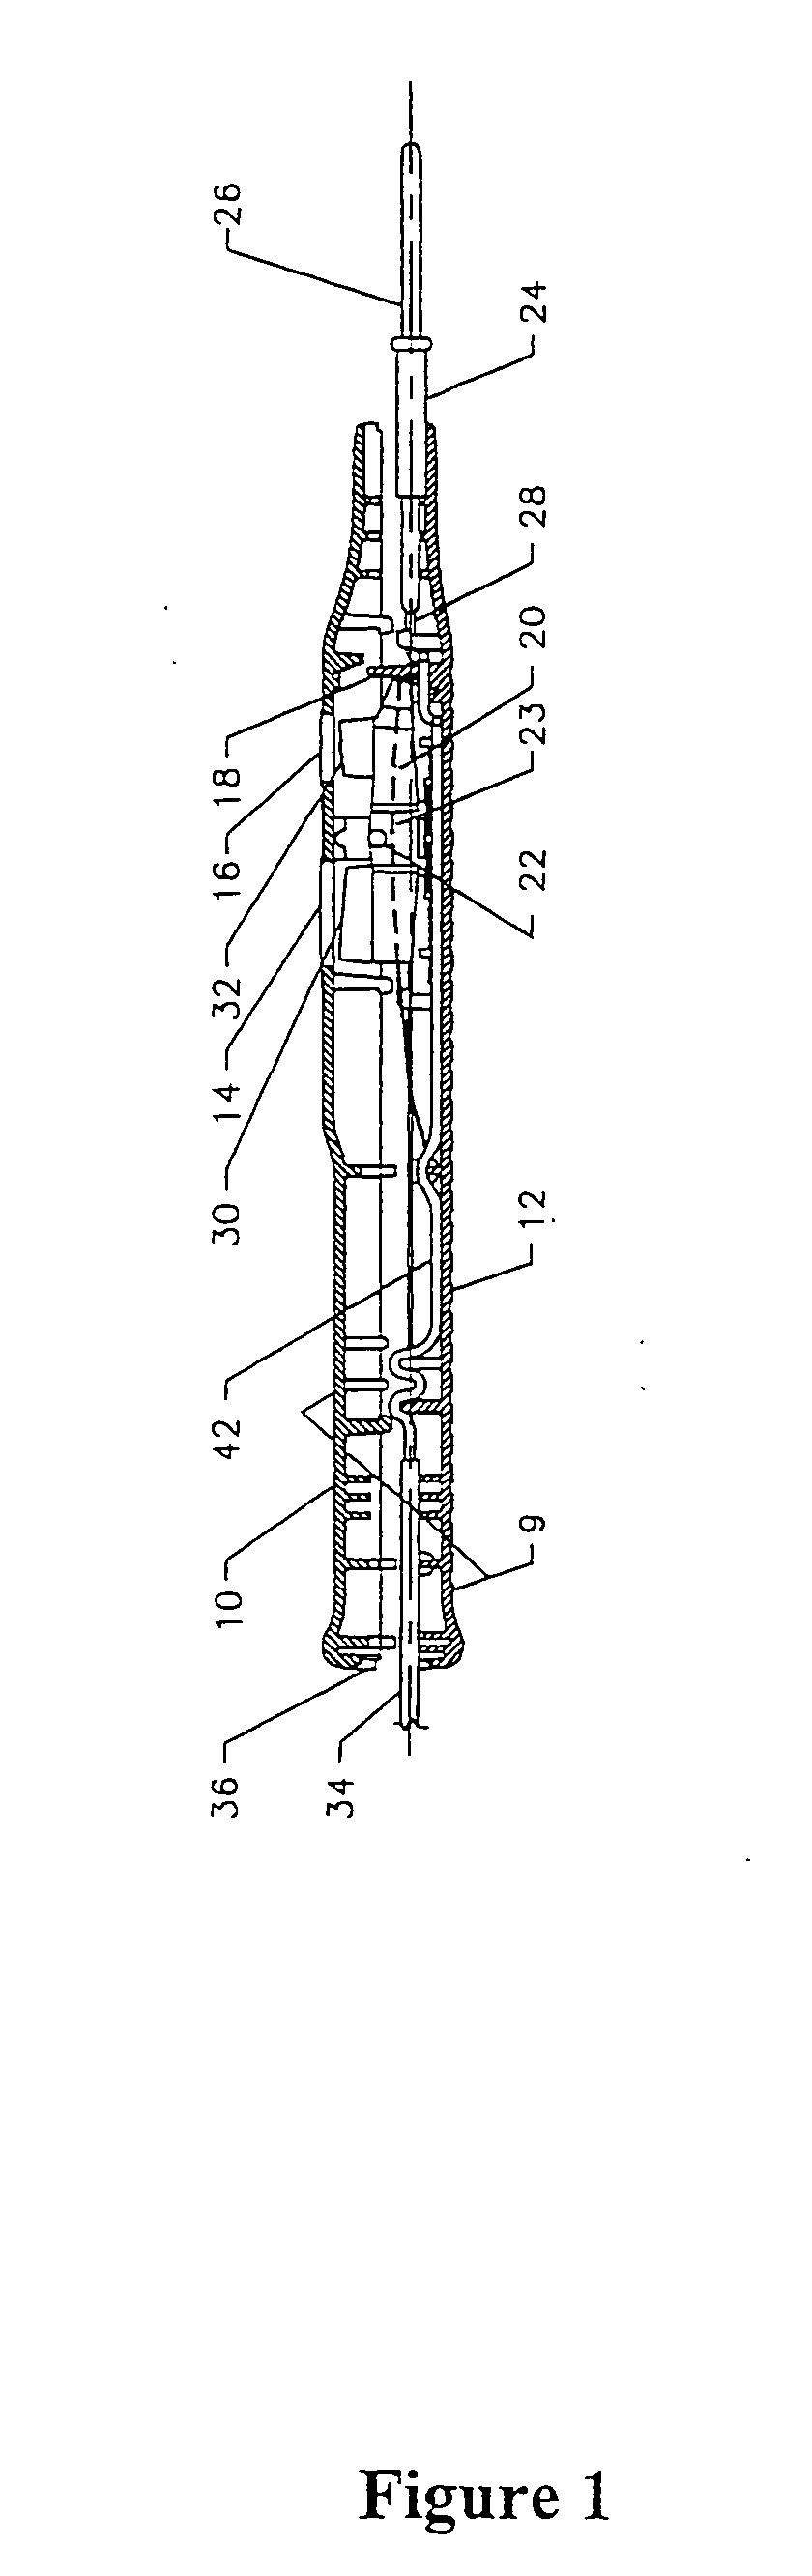 Apparatus and methods relating to fluorescent optical switches